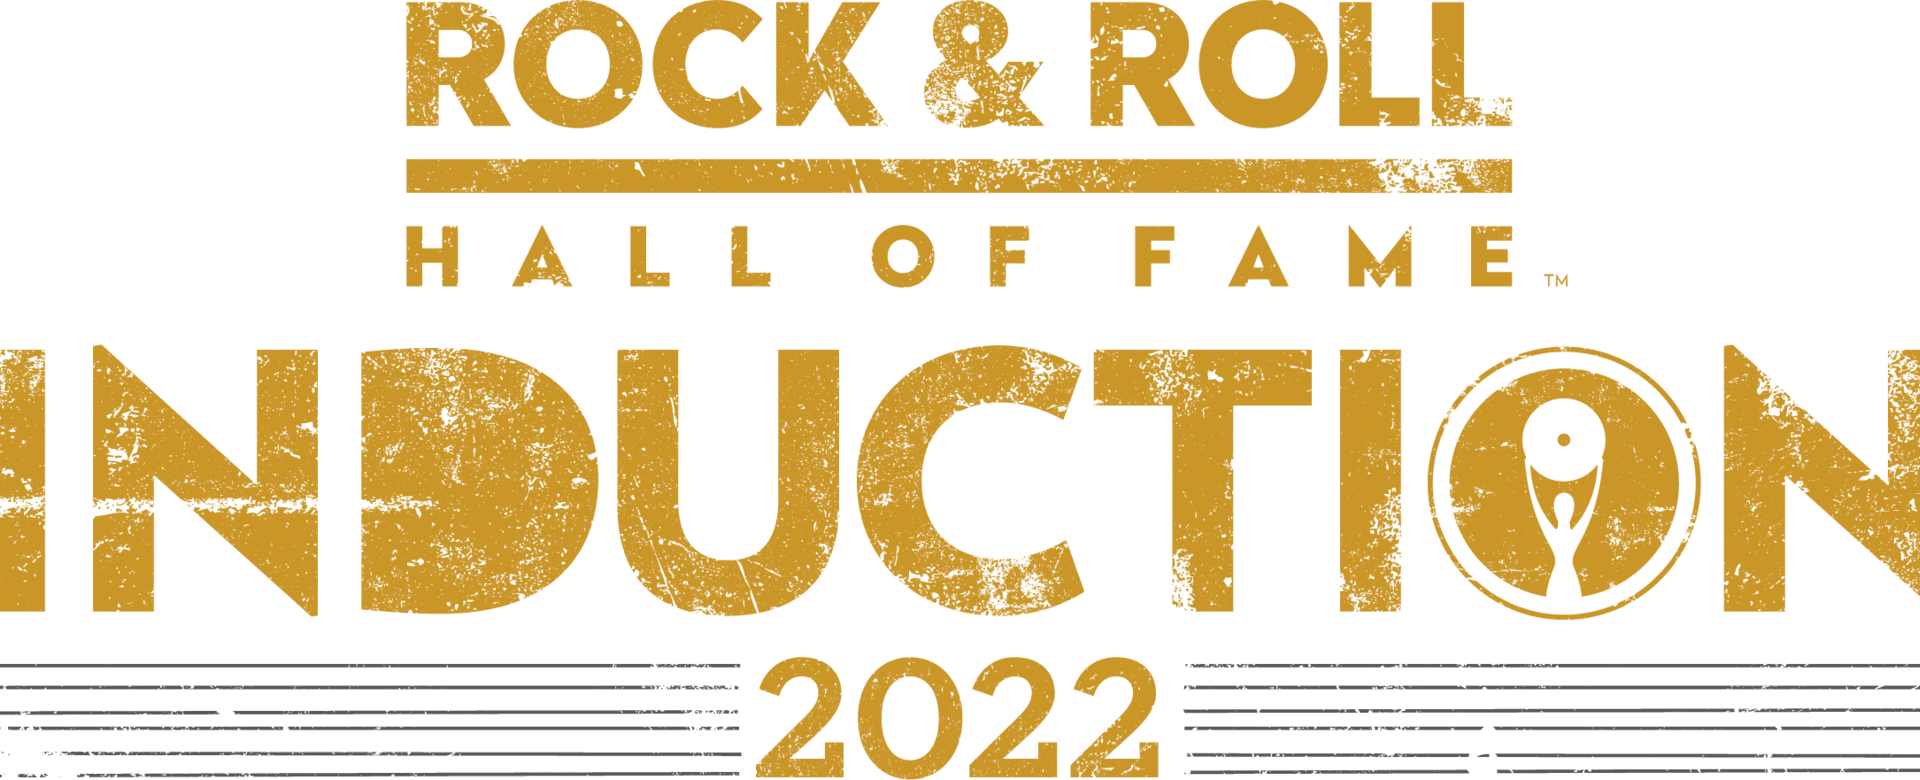 Rock & Roll Hall of Fame Announces 2022 Inductees | Rock & Roll